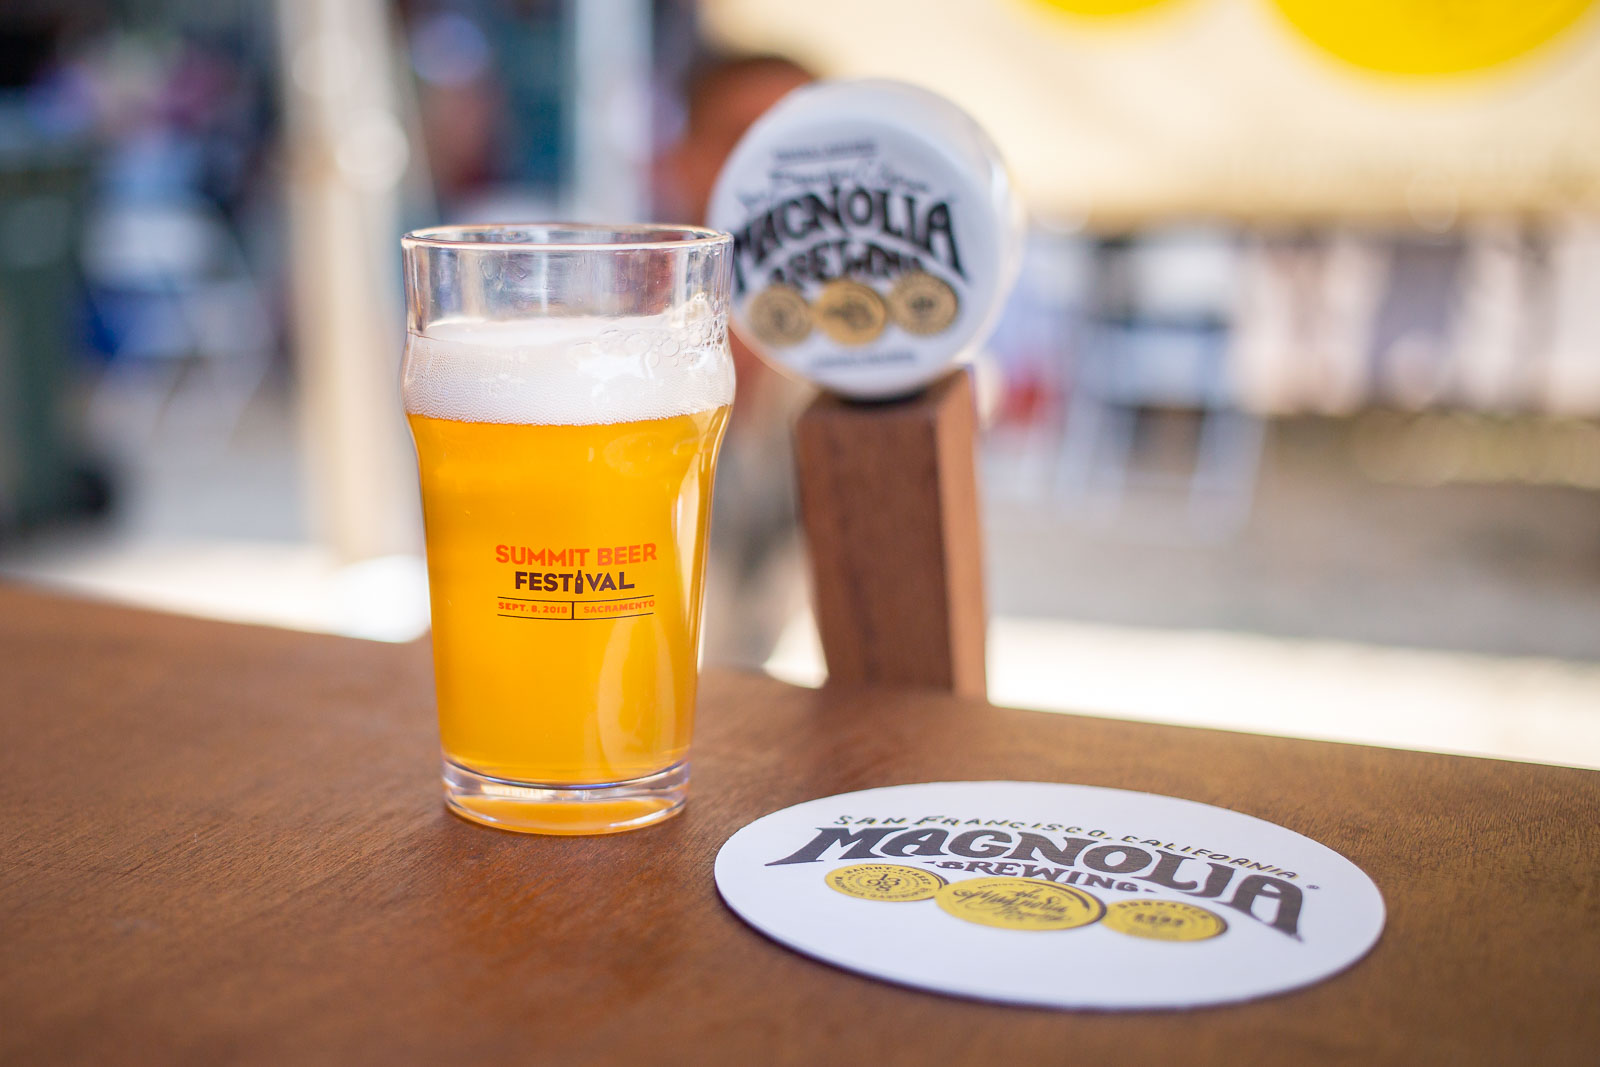 Tasting glass next to a Magnolia Brewing tap handle with Magnolia Brewing coaster.